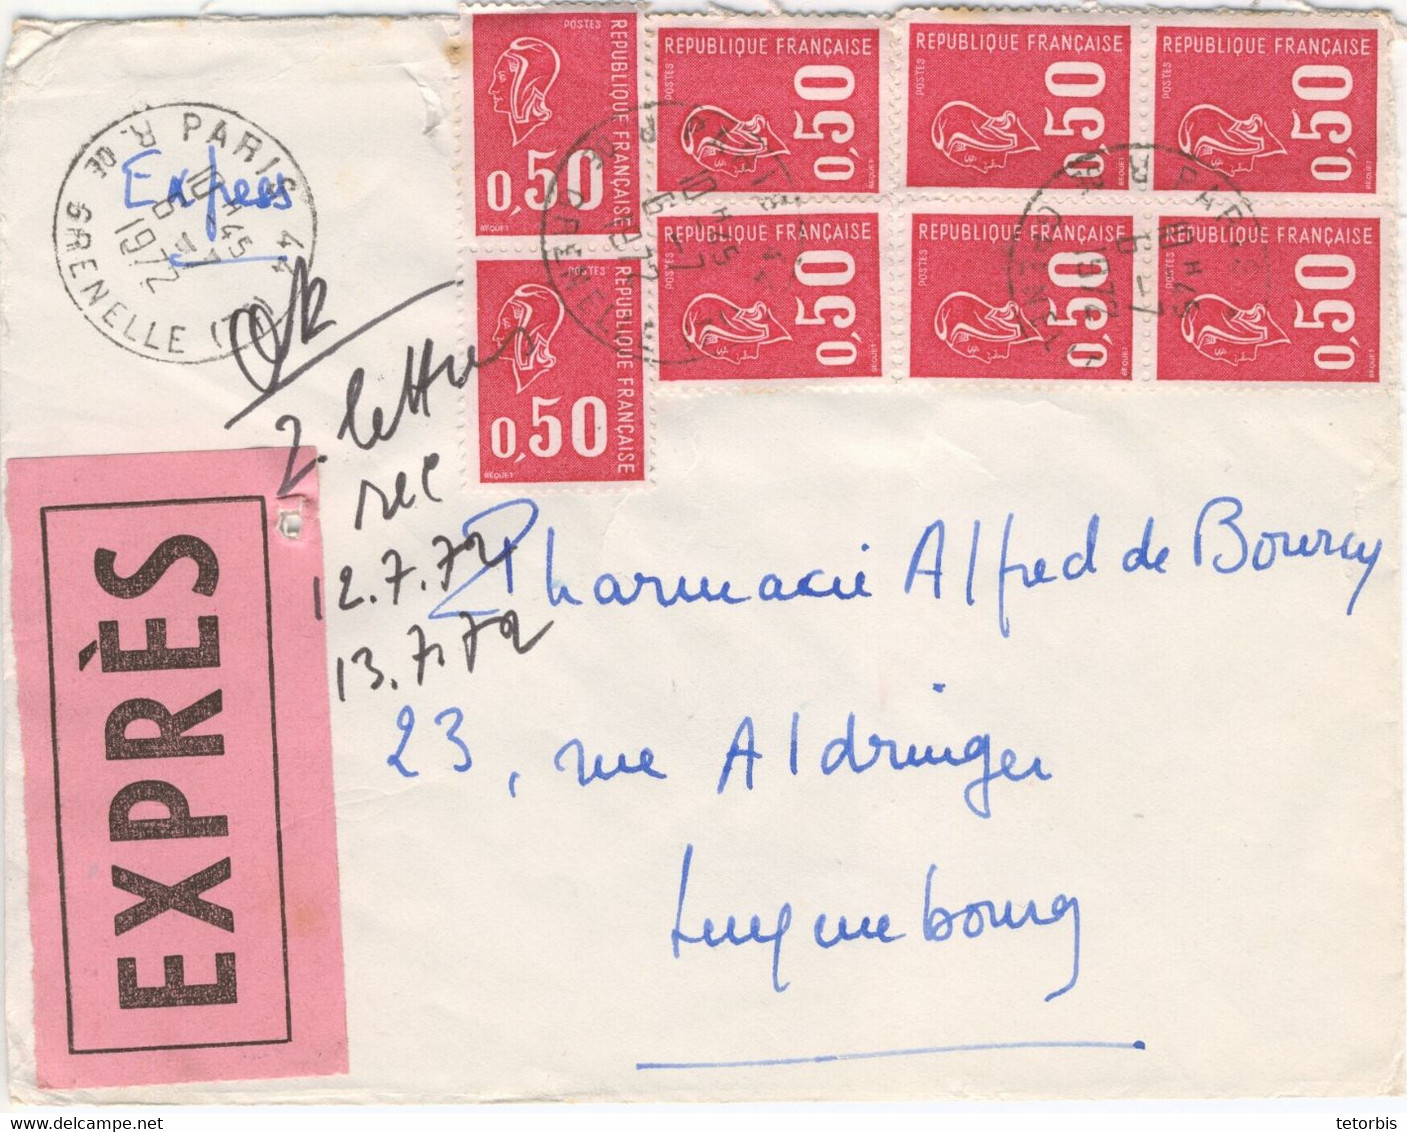 RARE- 4 PAIRES 50C MARIANNE BEQUET TARIF PARTICULIER 4F LETTRE EXPRES LUXEMBOURG 06/07/72 - 1961-....